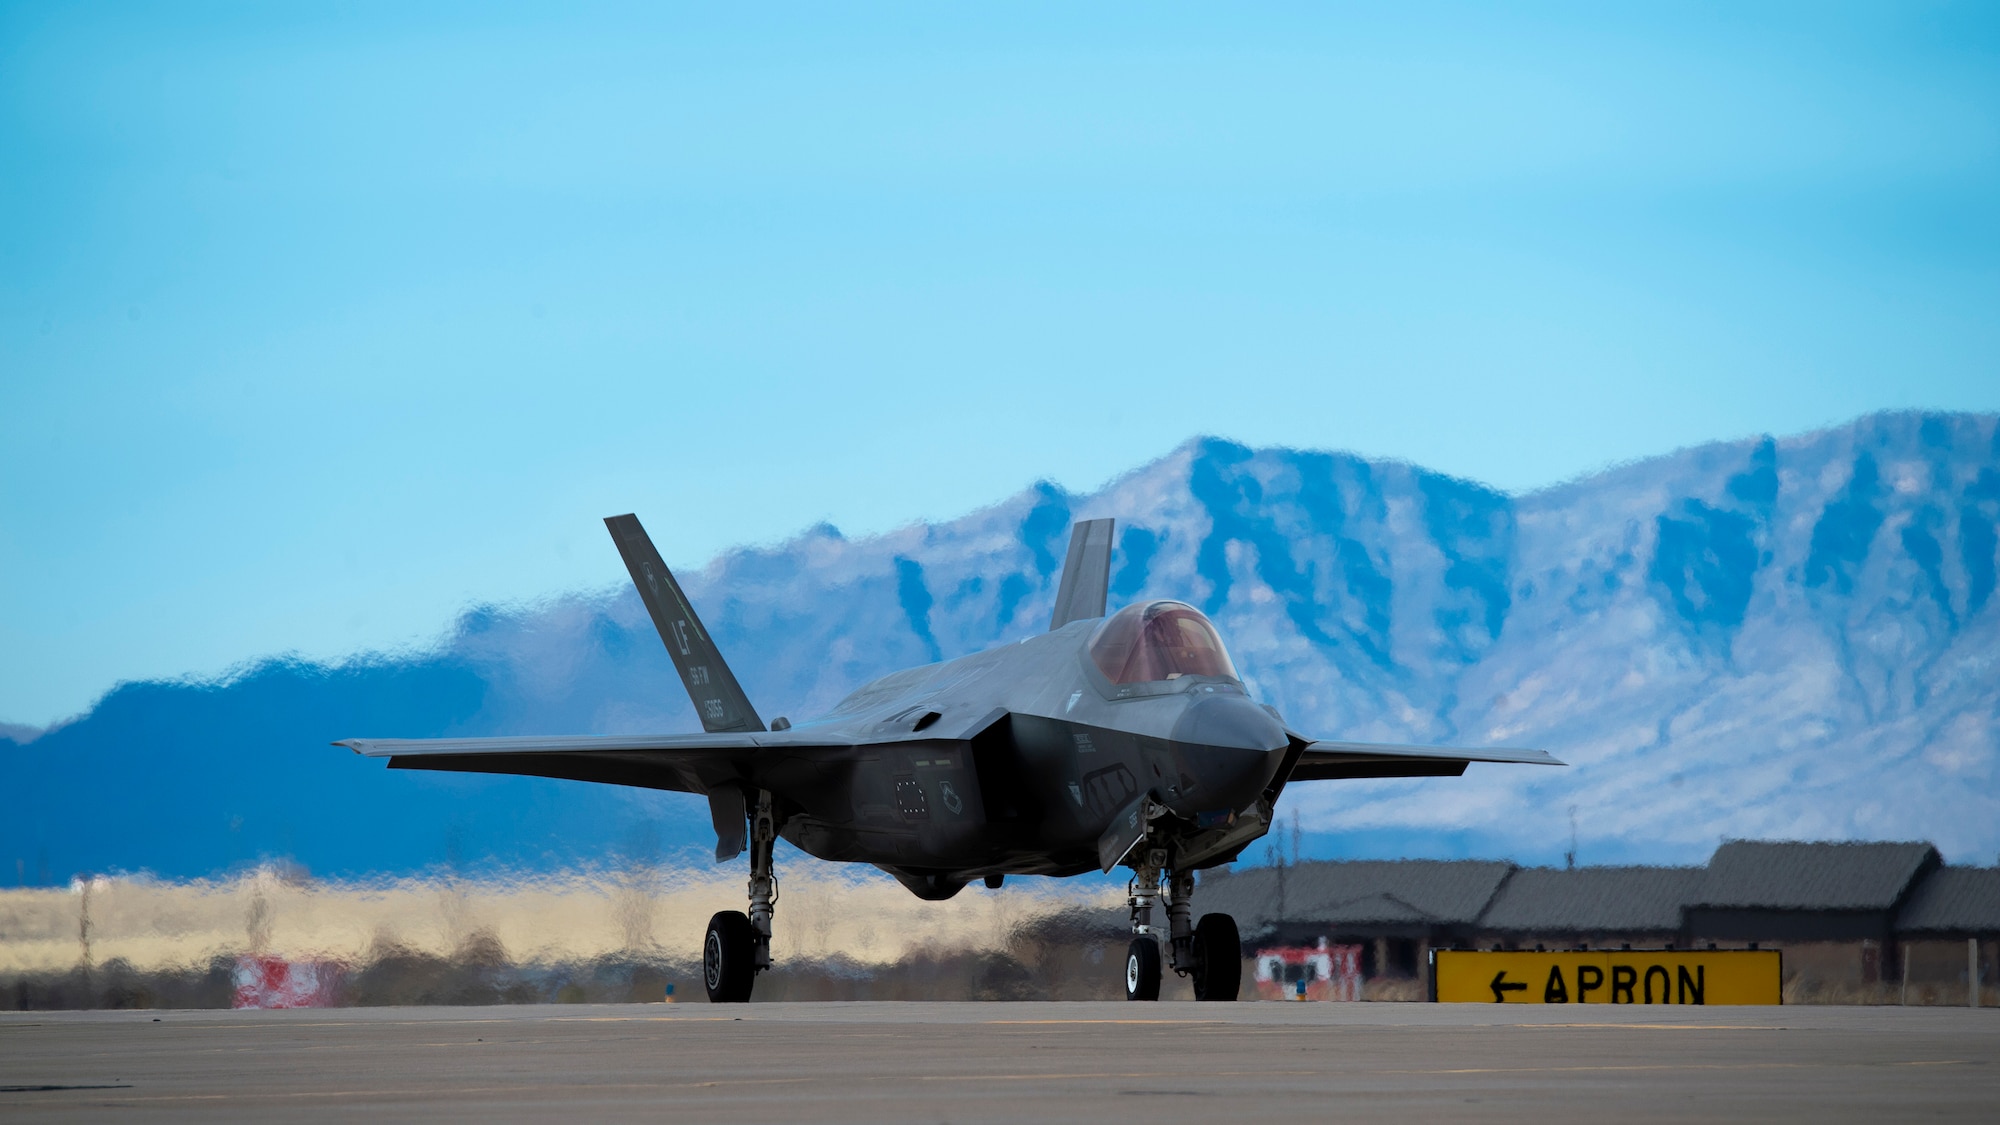 An F-35A Lighting II assigned to the 56th Fighter Wing at Luke Air Force Base, Arizona, taxis after landing at Holloman Air Force Base, New Mexico, March 2, 2023.